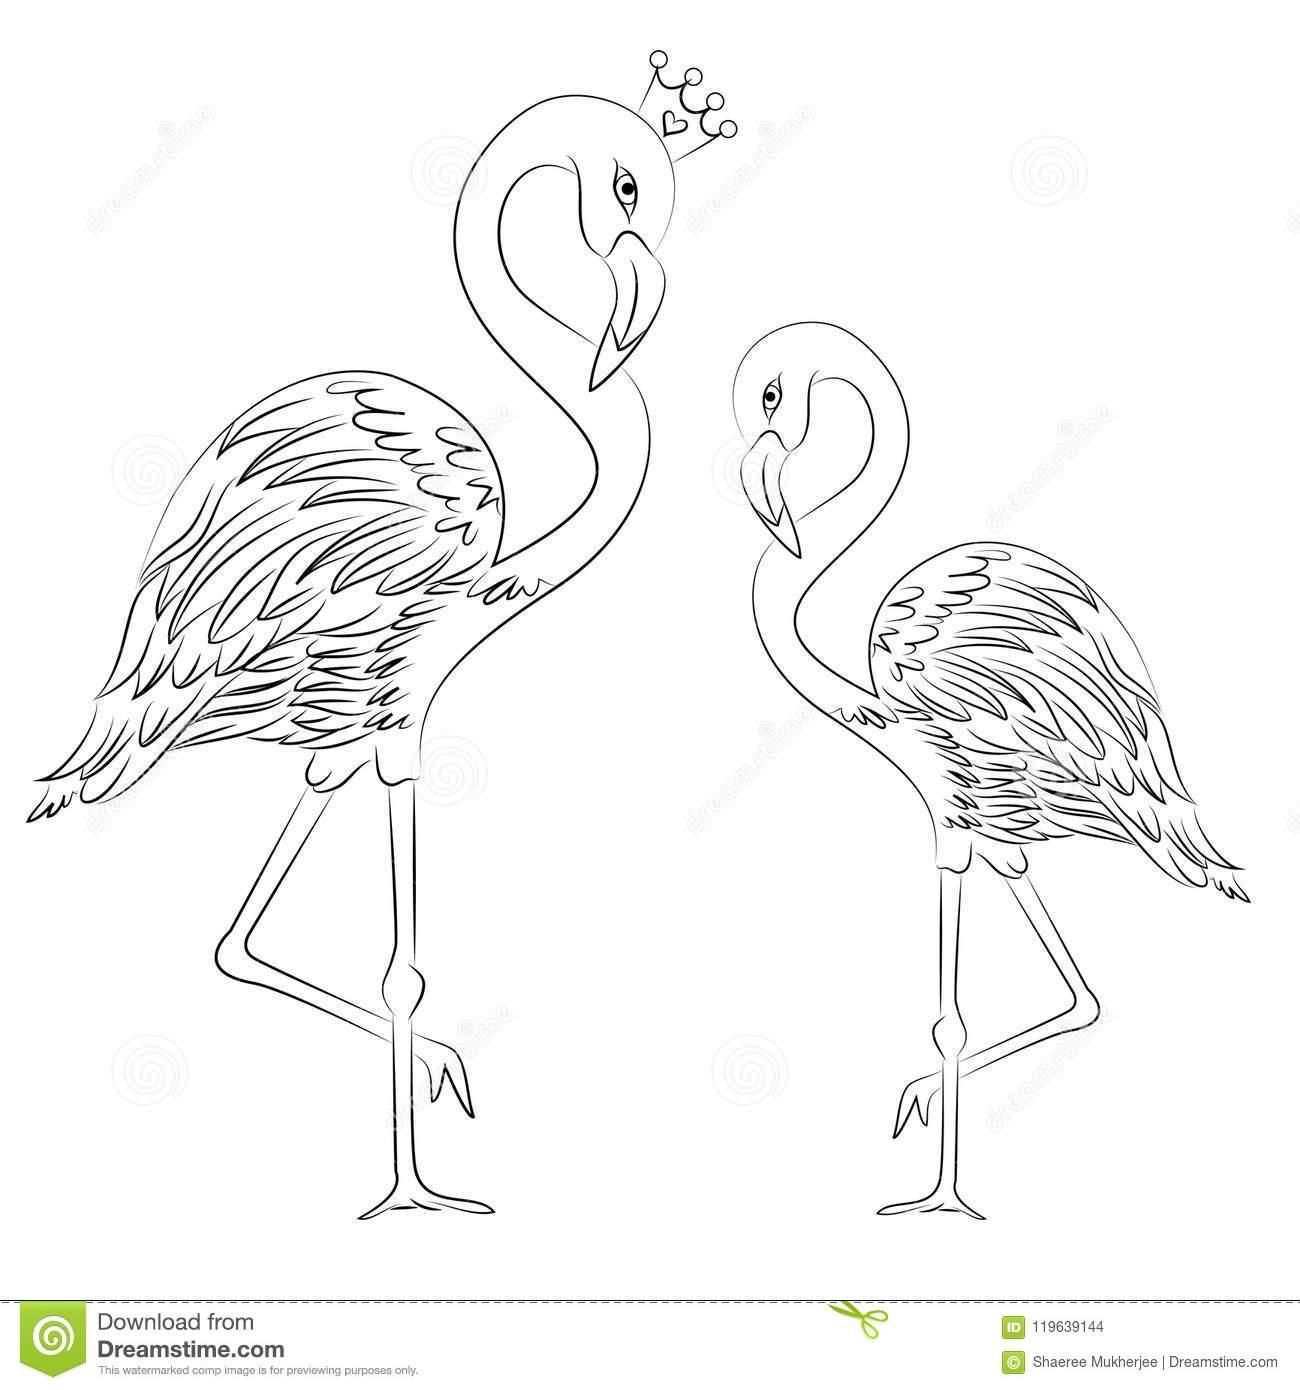 42 Coloring Page Flamingo Flamingo Coloring Page How To Draw Flamingo Coloring Pages